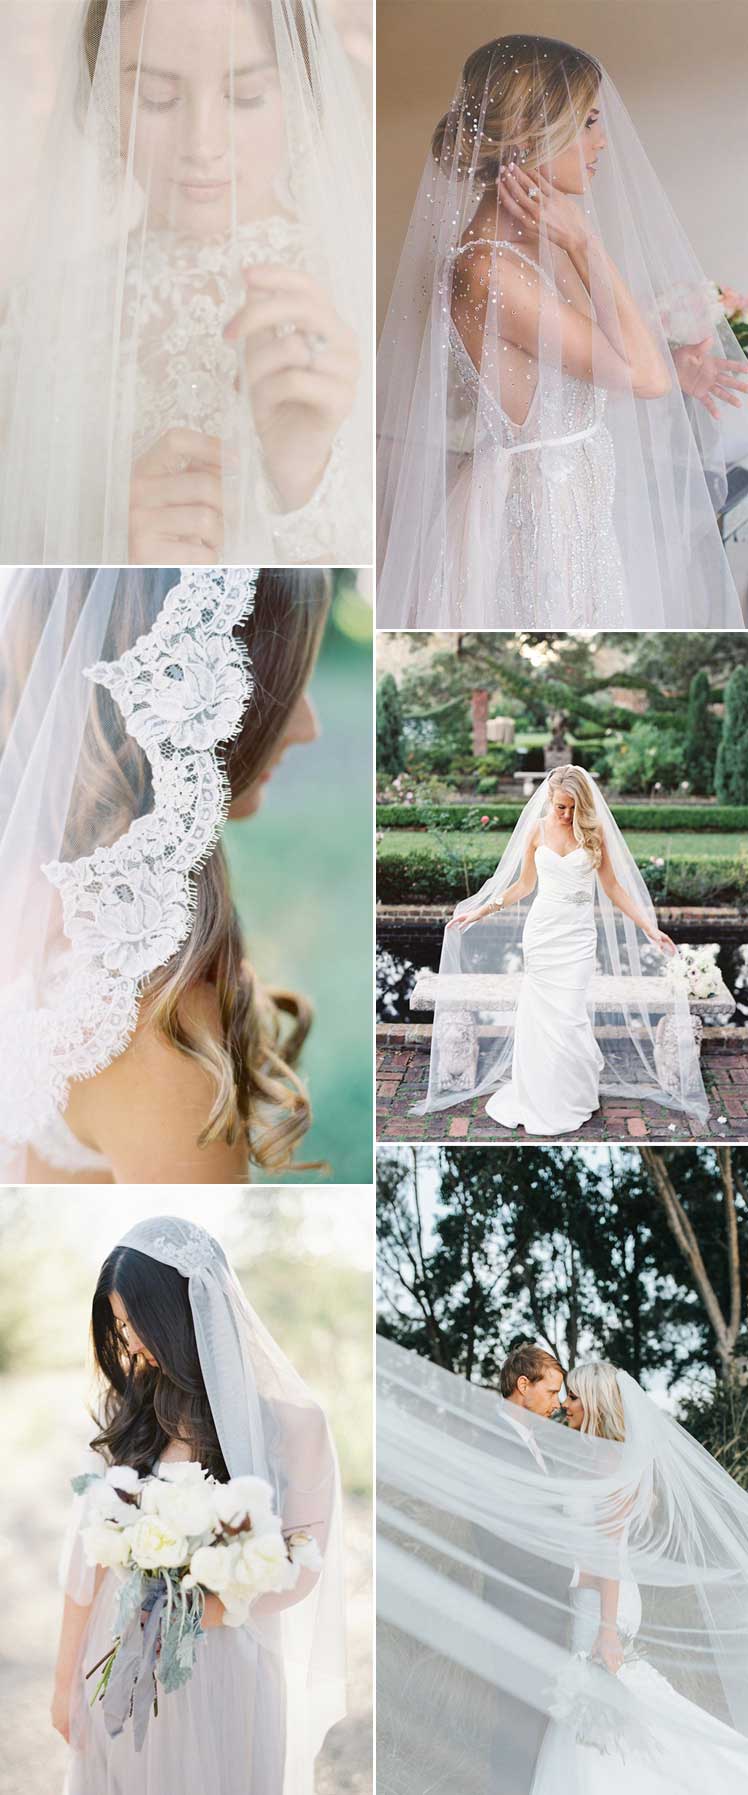 Do you need help to decide whether to wear a wedding veil or not?